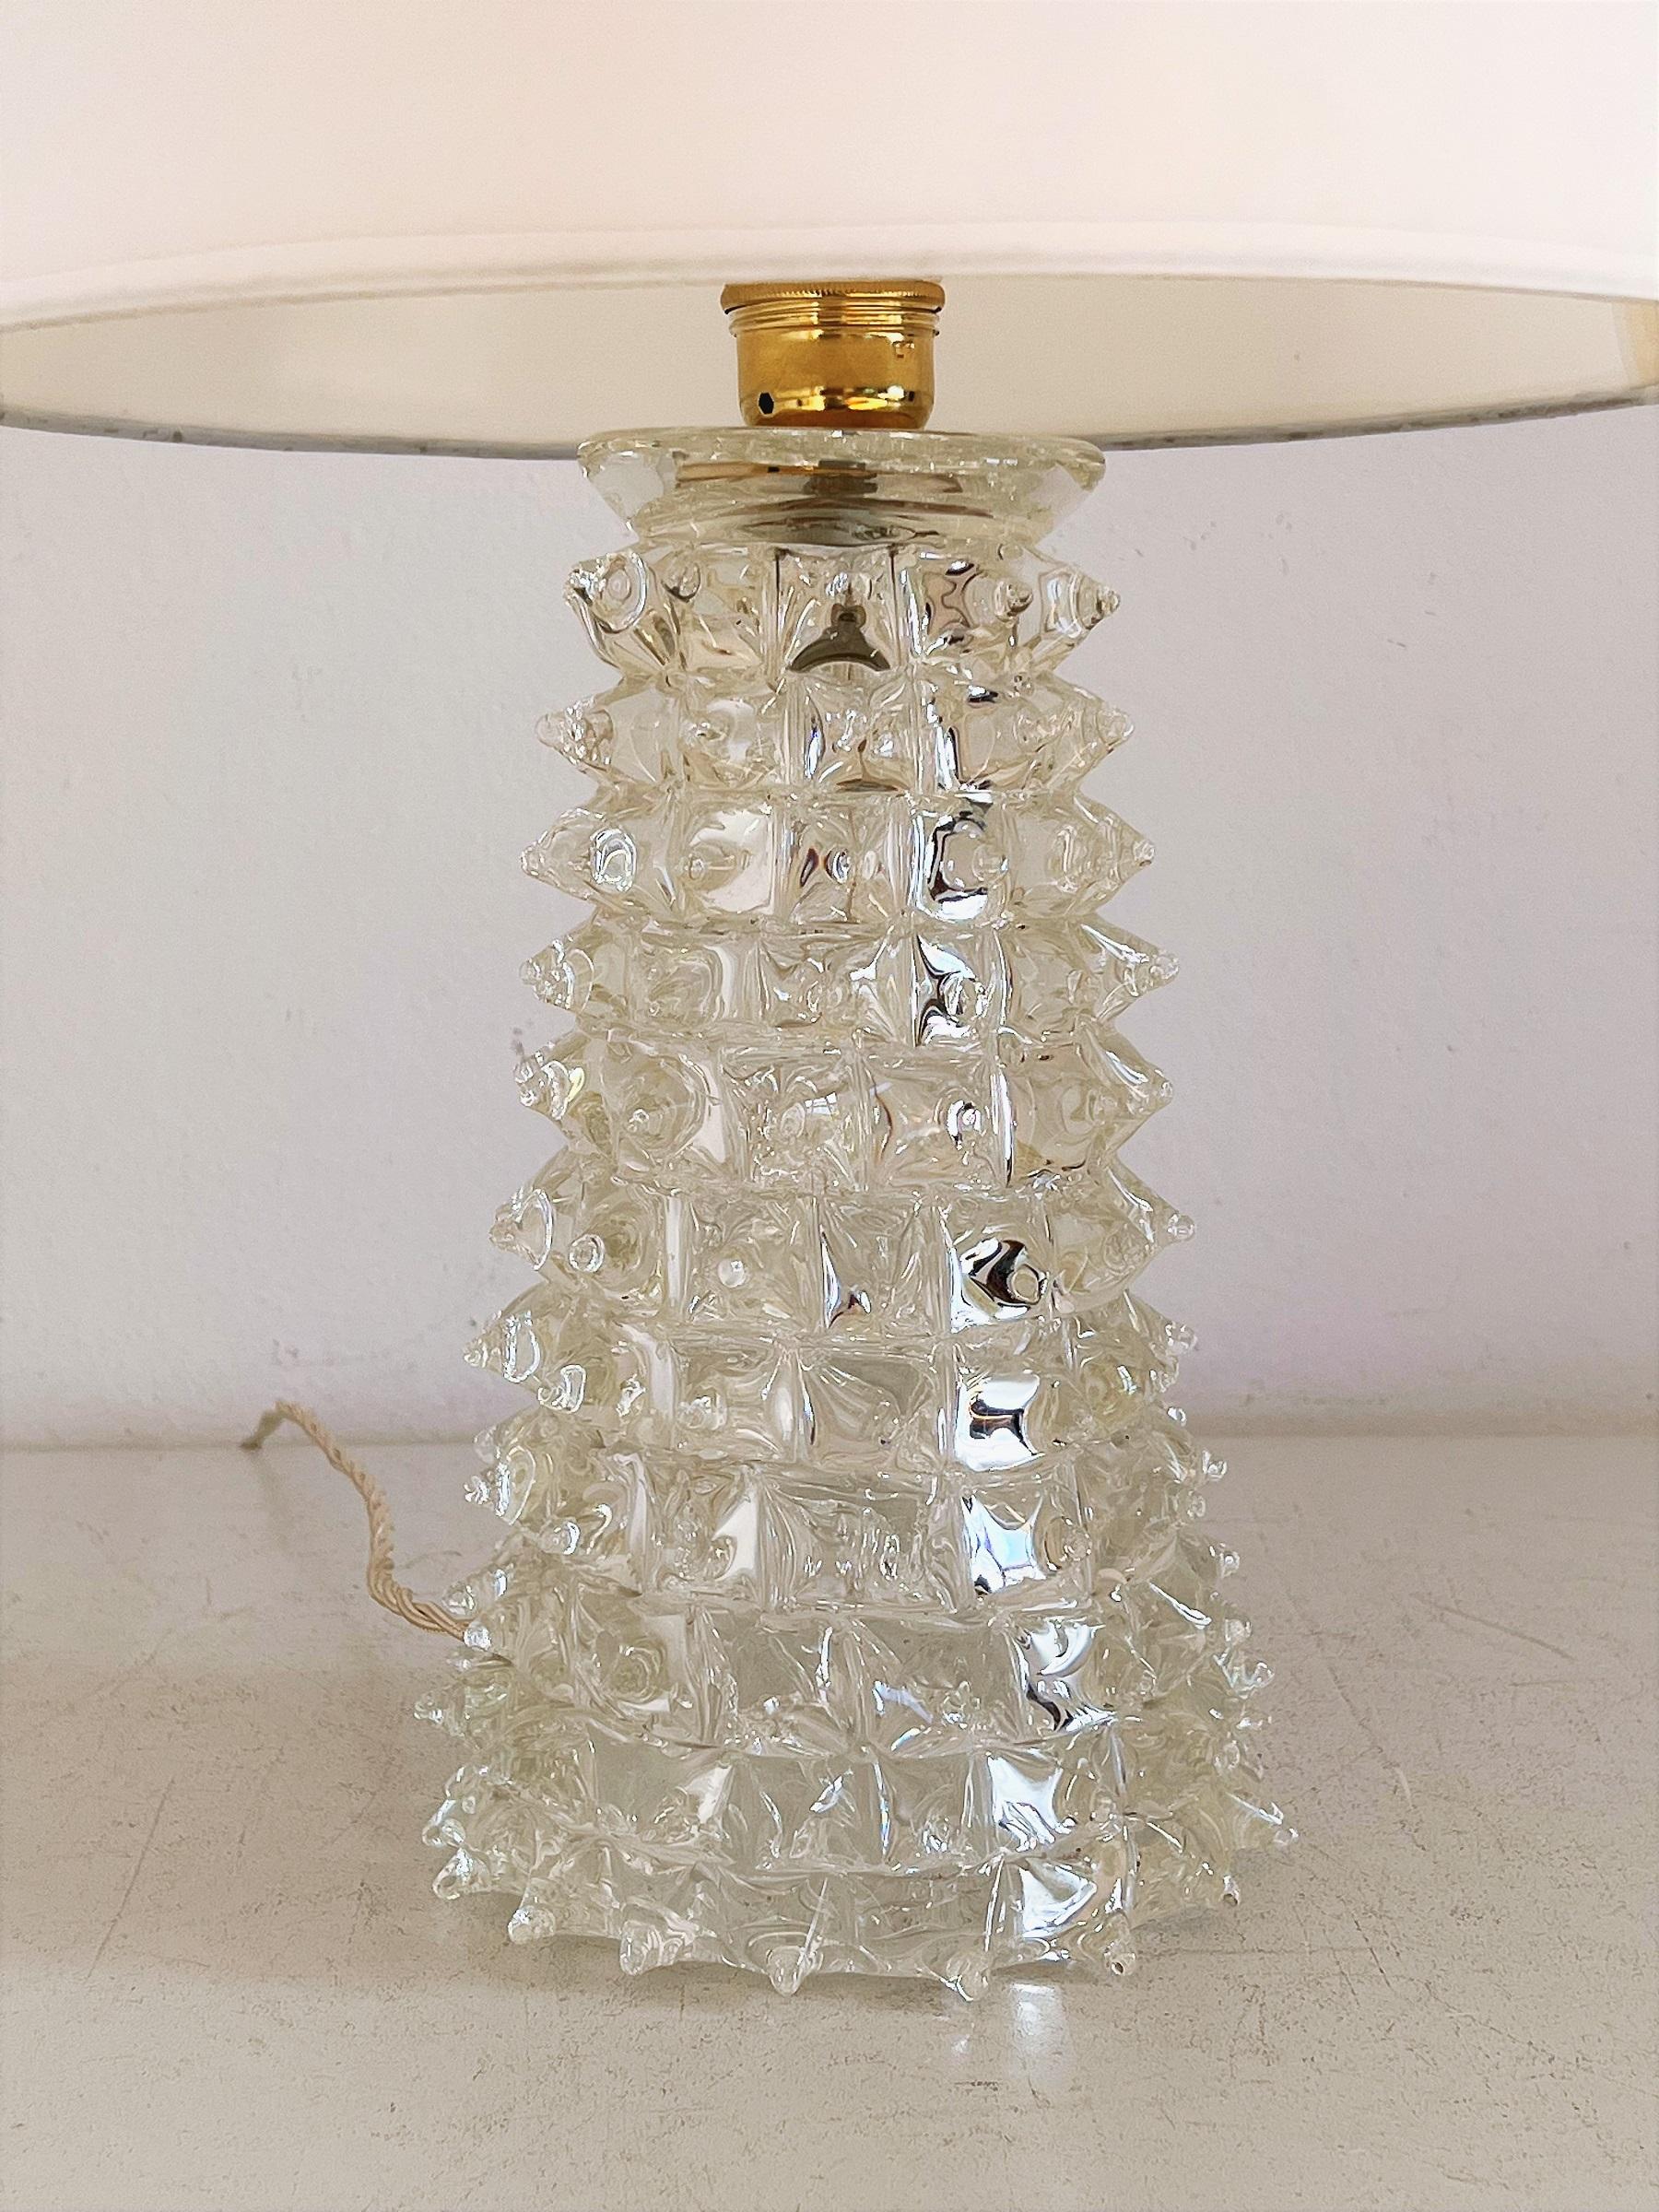 Hand-Crafted Italian Midcentury Rostrato Crystal Glass Table Lamp in Barovier Toso Style 1950